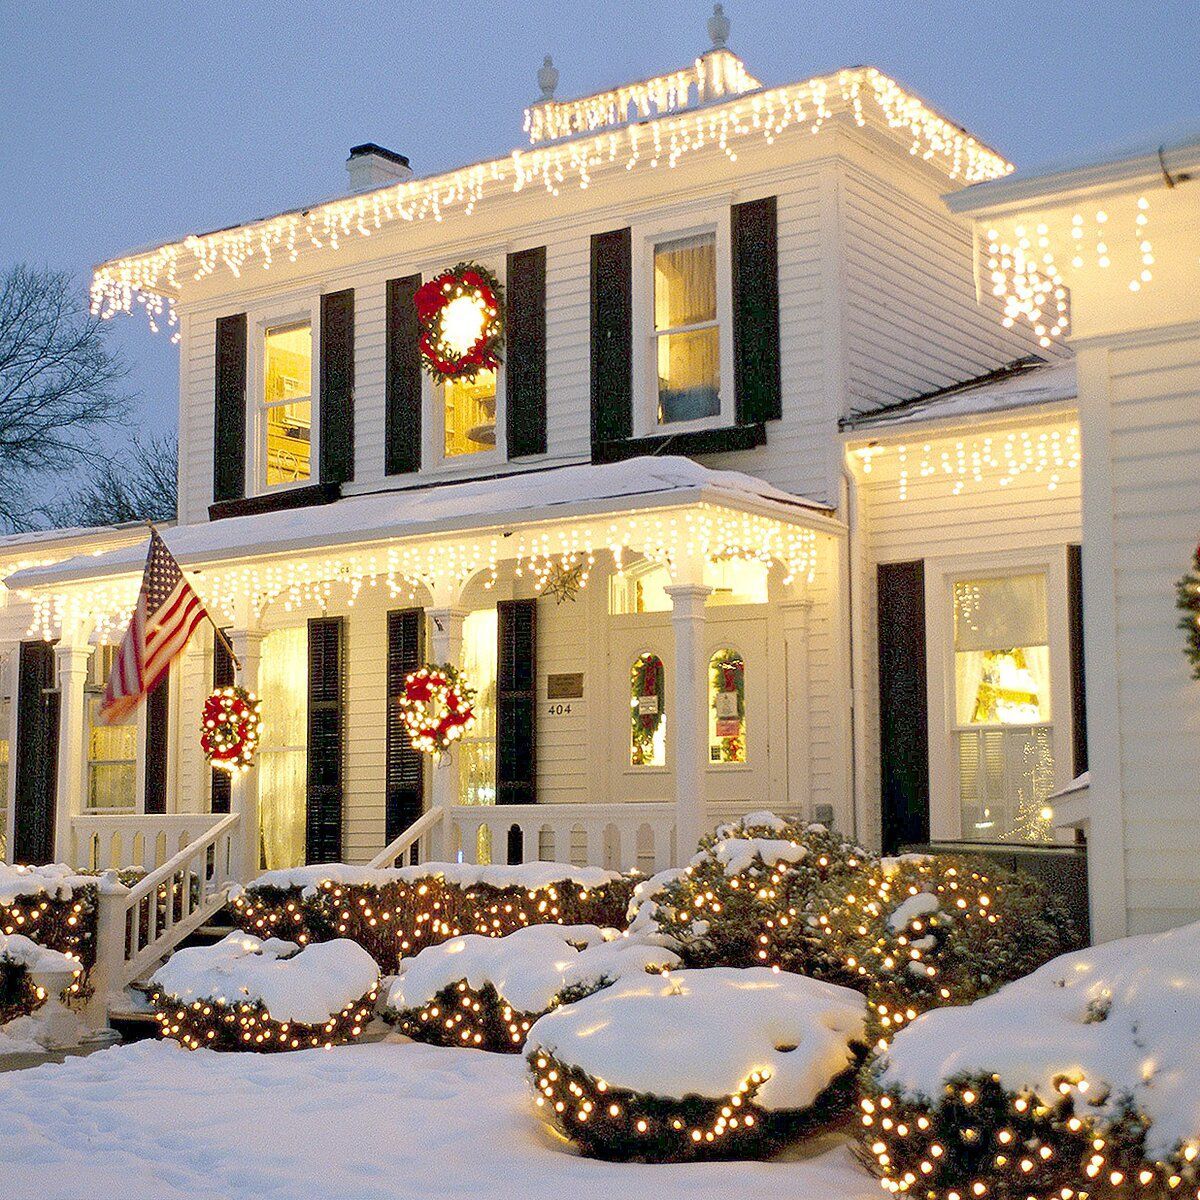 30 Ideas for the Best Outdoor Christmas Decorations on the Block - 30 Ideas for the Best Outdoor Christmas Decorations on the Block -   19 christmas decor outdoor lights ideas